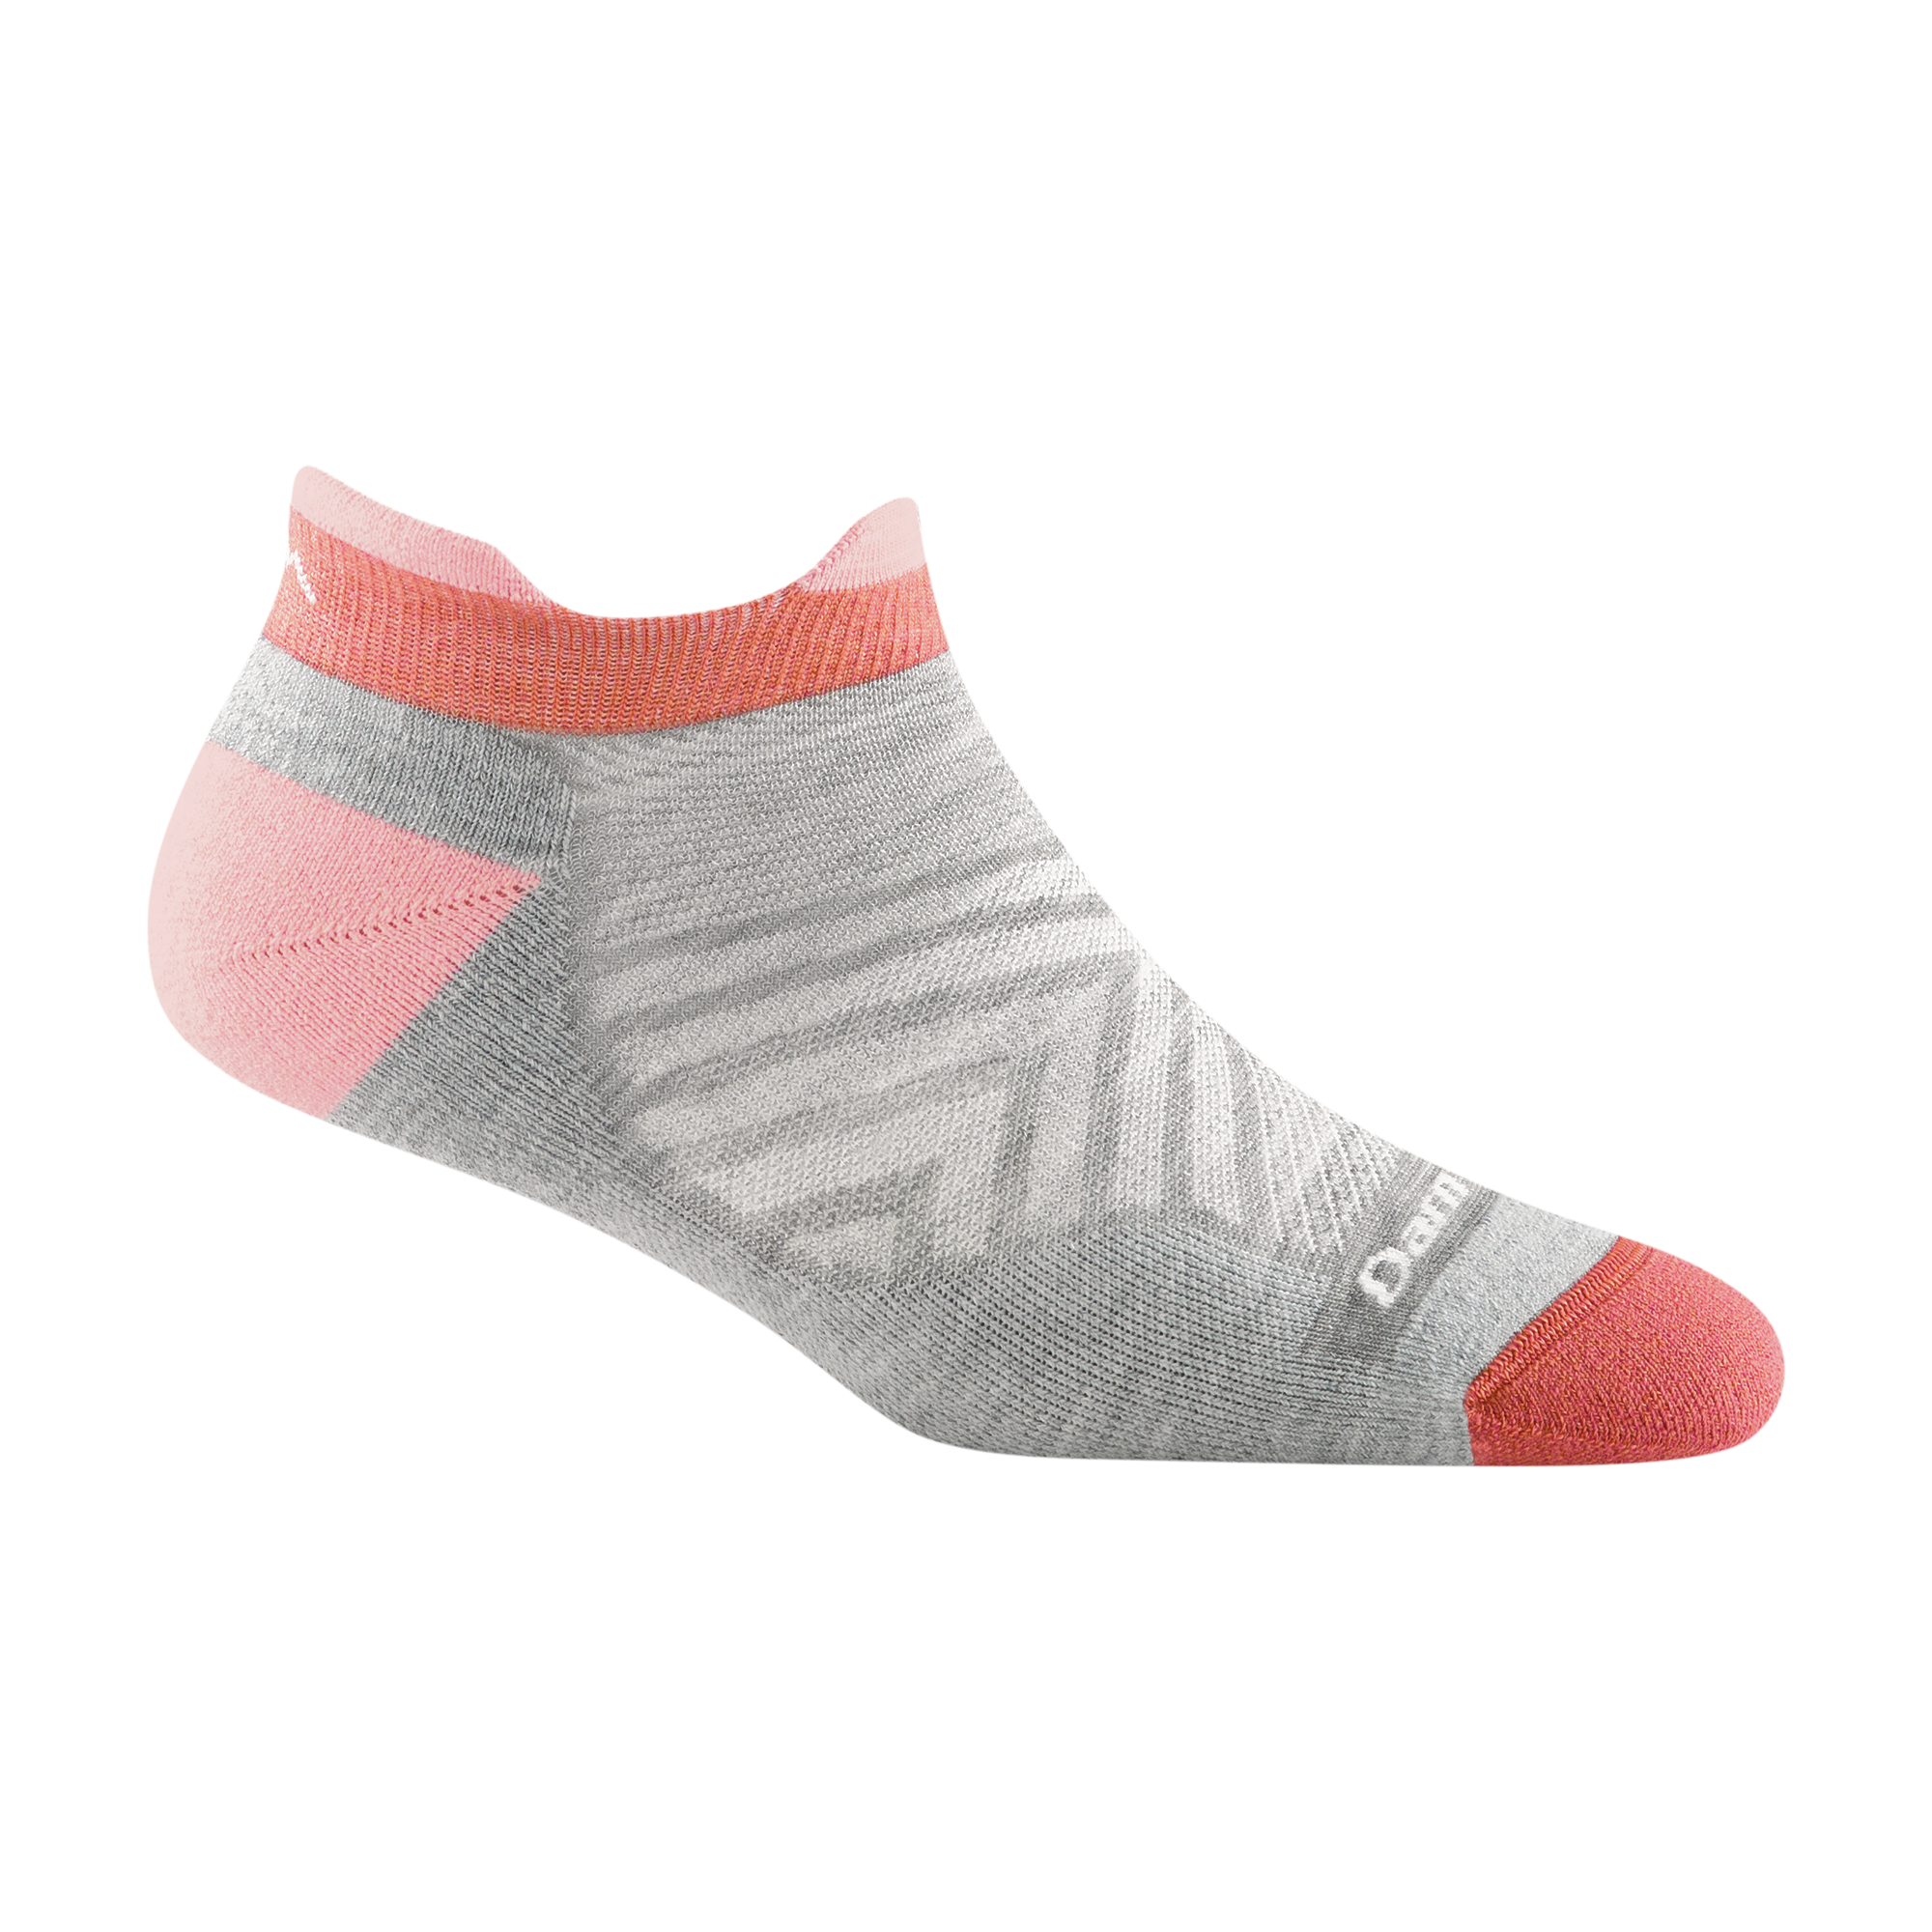 1047 women's no show tab running sock in ash gray with coral toe and pink heel and tab accents